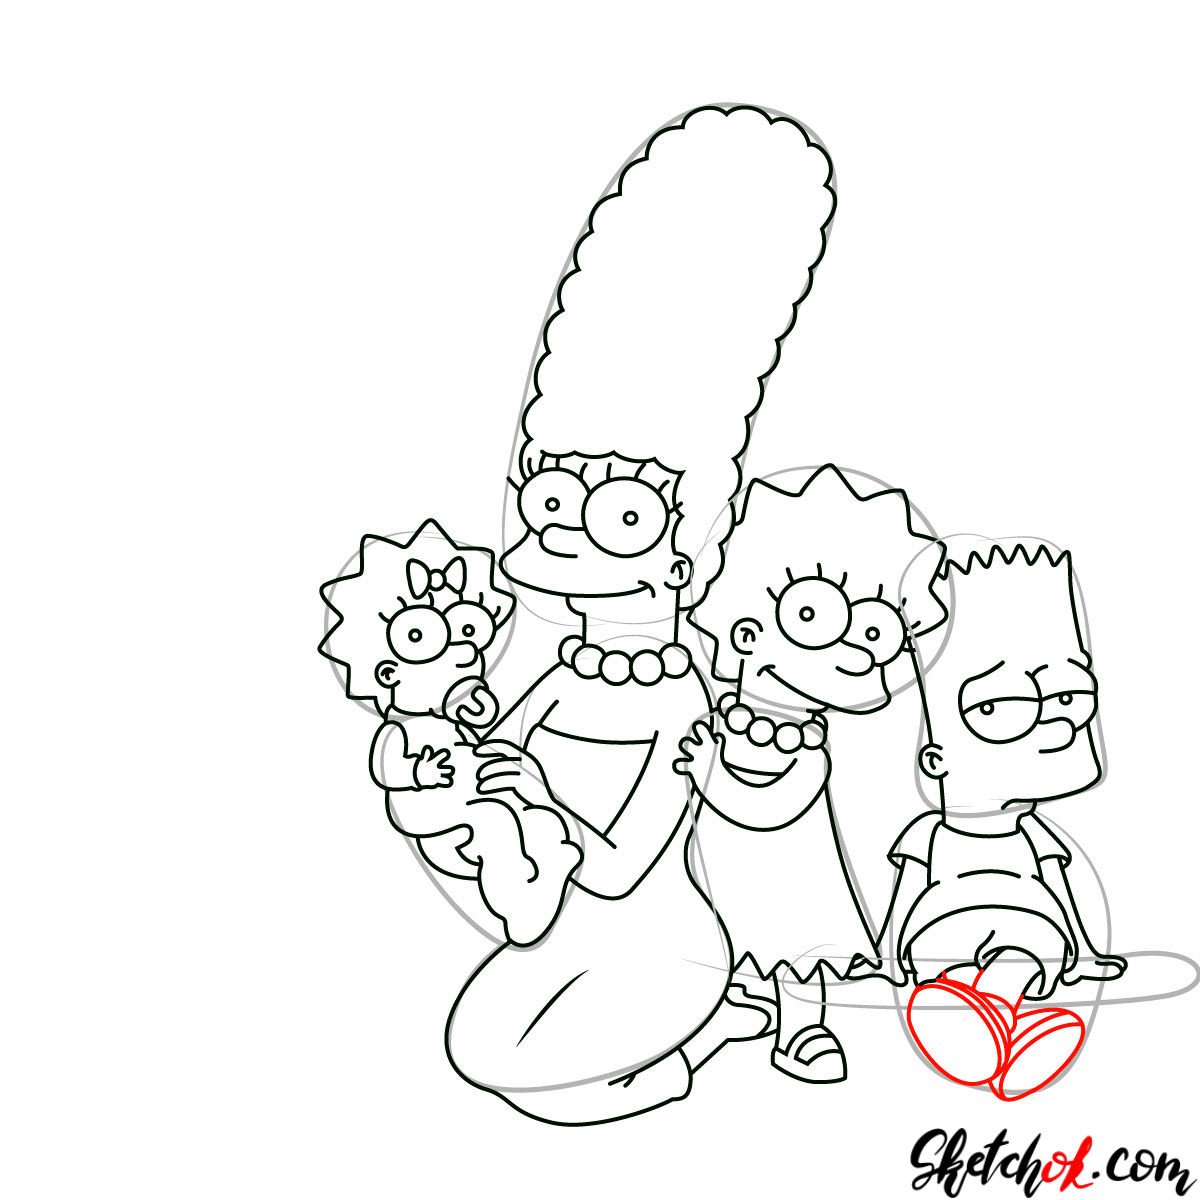 How to draw the Simpsons Family - step 21